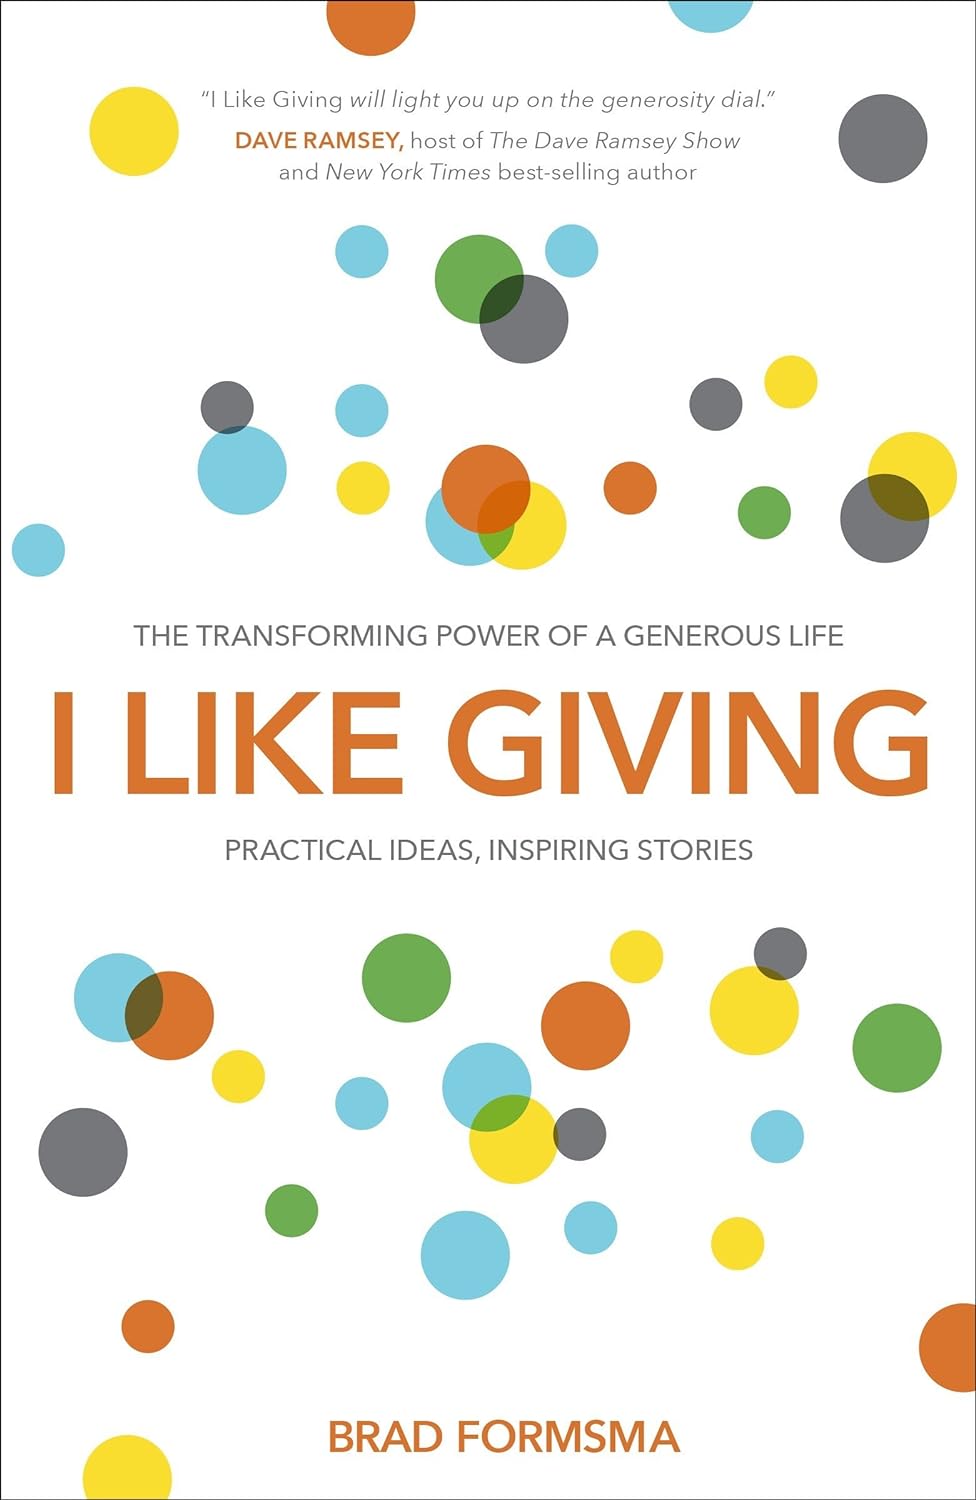 Brad Formsma's I Like Giving in this comprehensive book review.